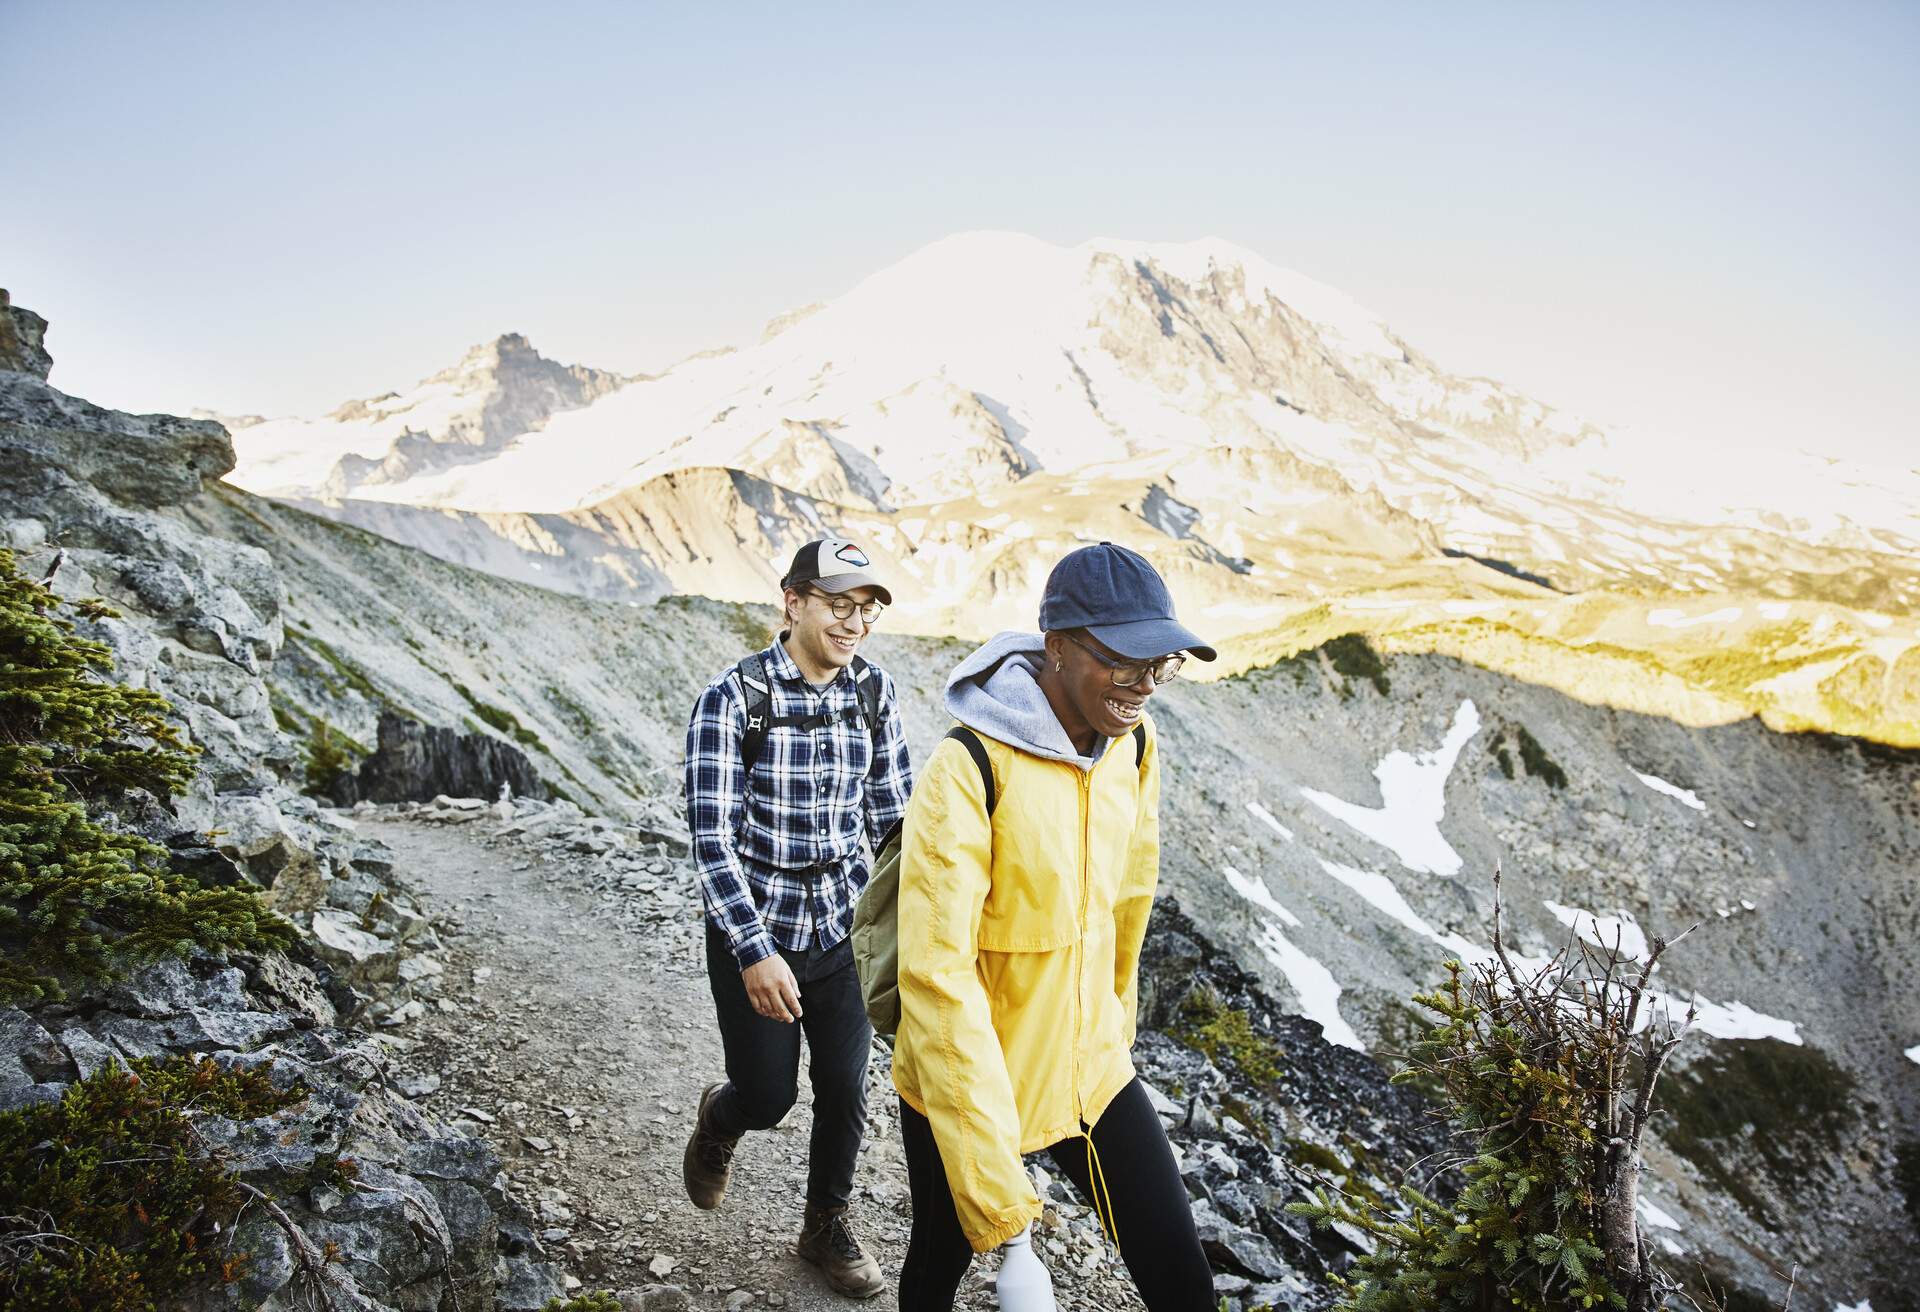 dest_alps_mt-rainier_theme_hiking_people_friends_couple_gettyimages-1287678994_universal_within-usage-period_85181